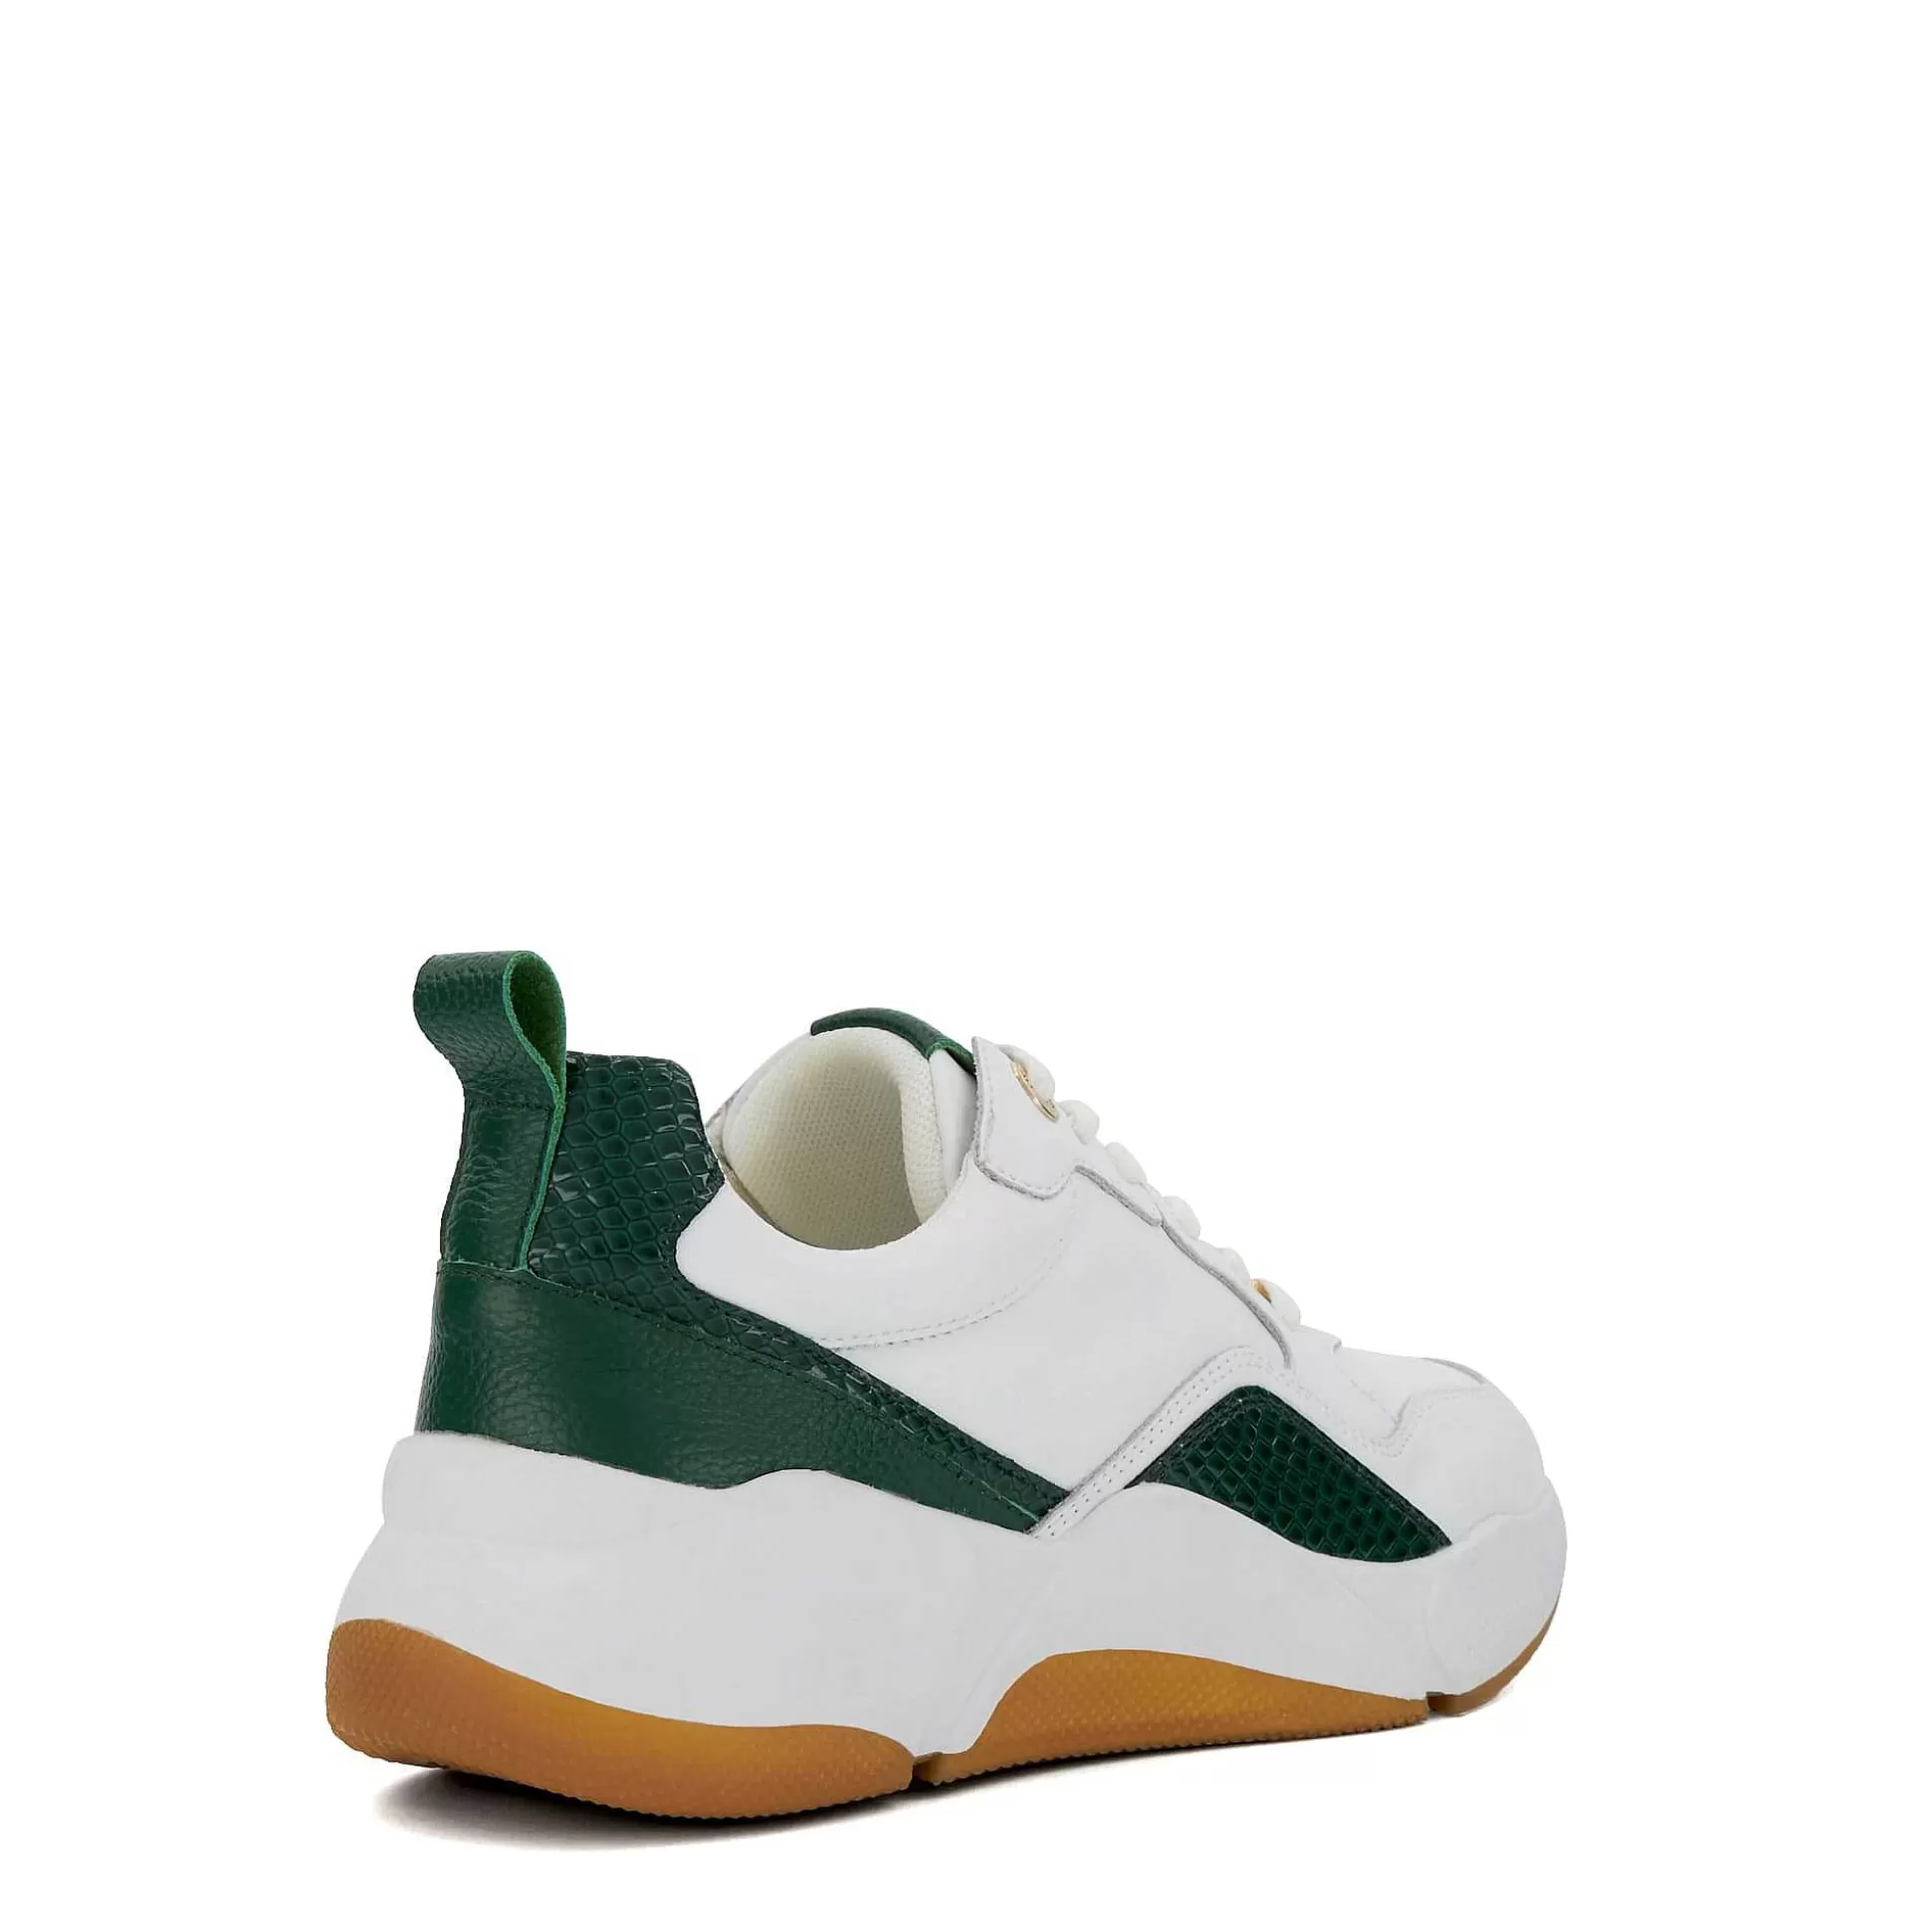 Dune London EAGERLY - GREEN-Women Flat Shoes | Trainers